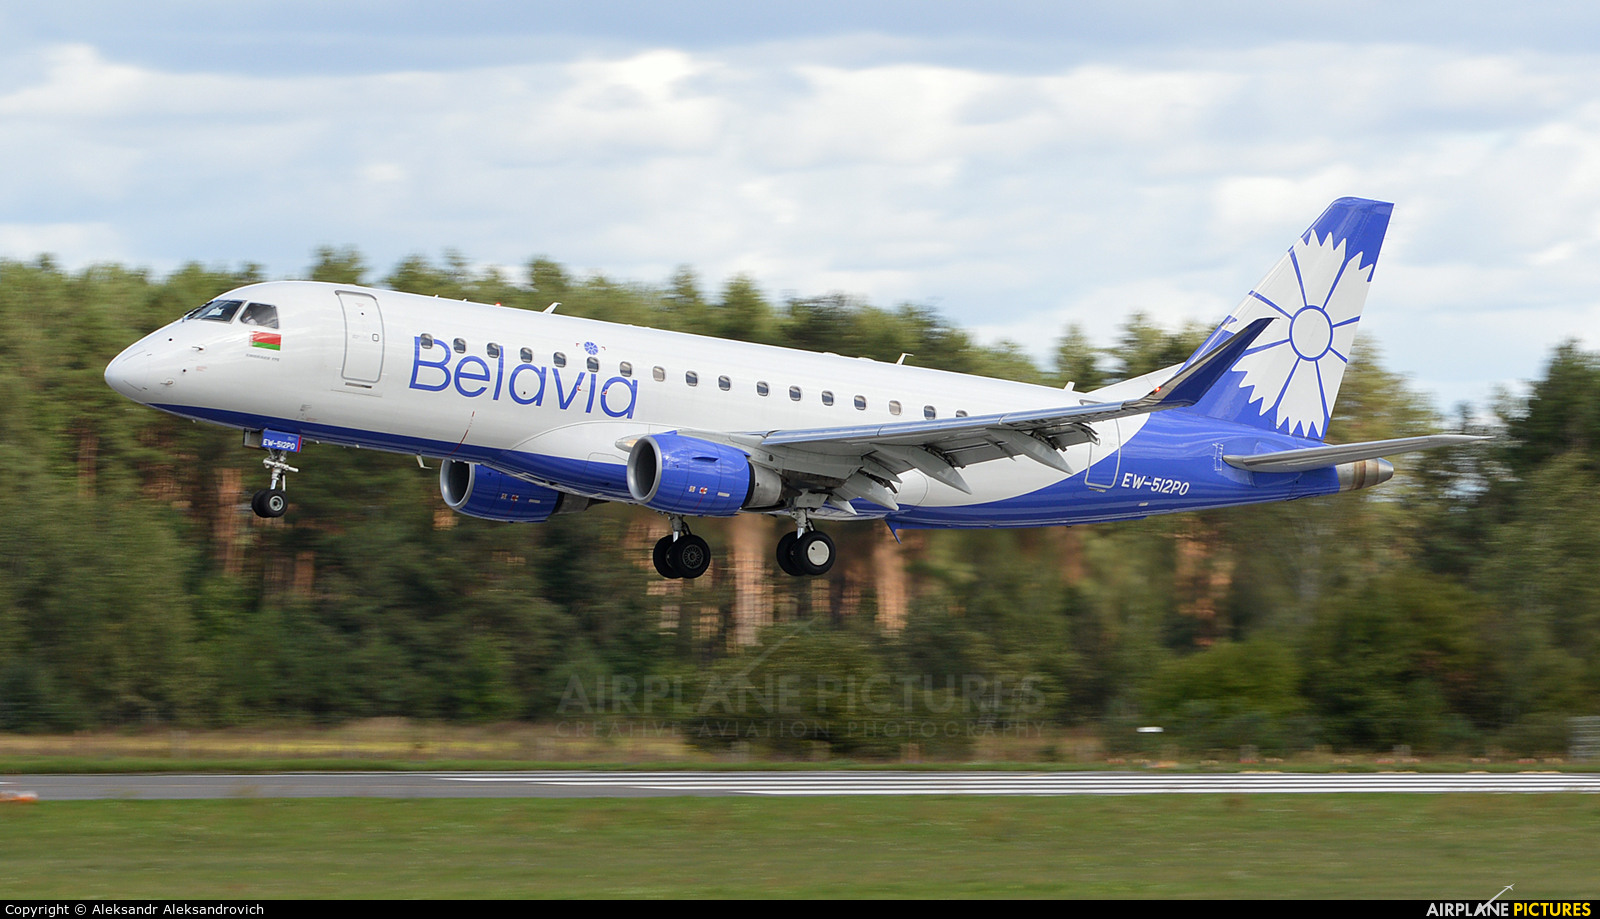 Belavia EW-512PO aircraft at Brest Airport